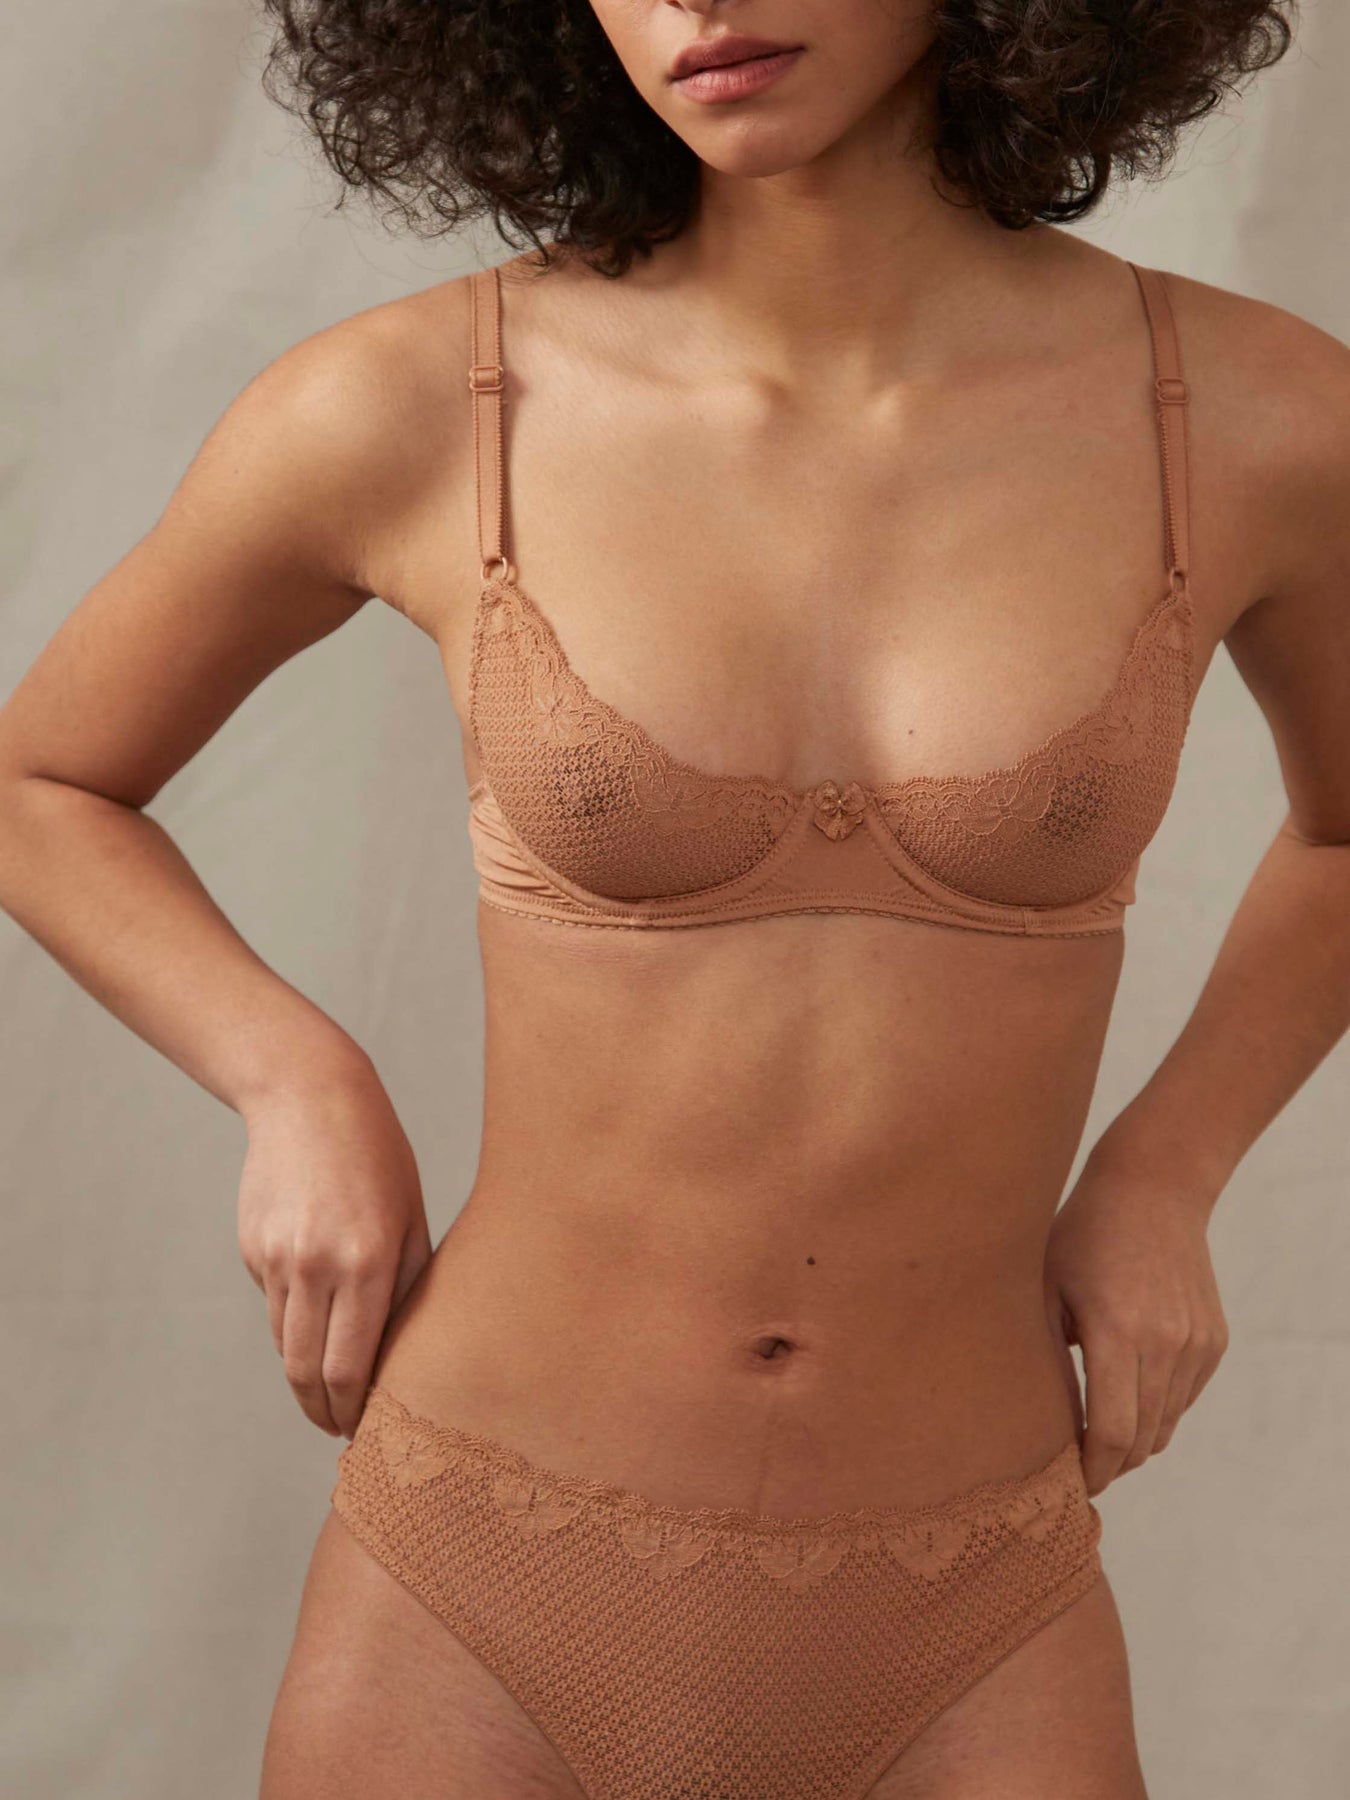 Duet by Timpa: Lace Thong with Keyhole Back - Caramel